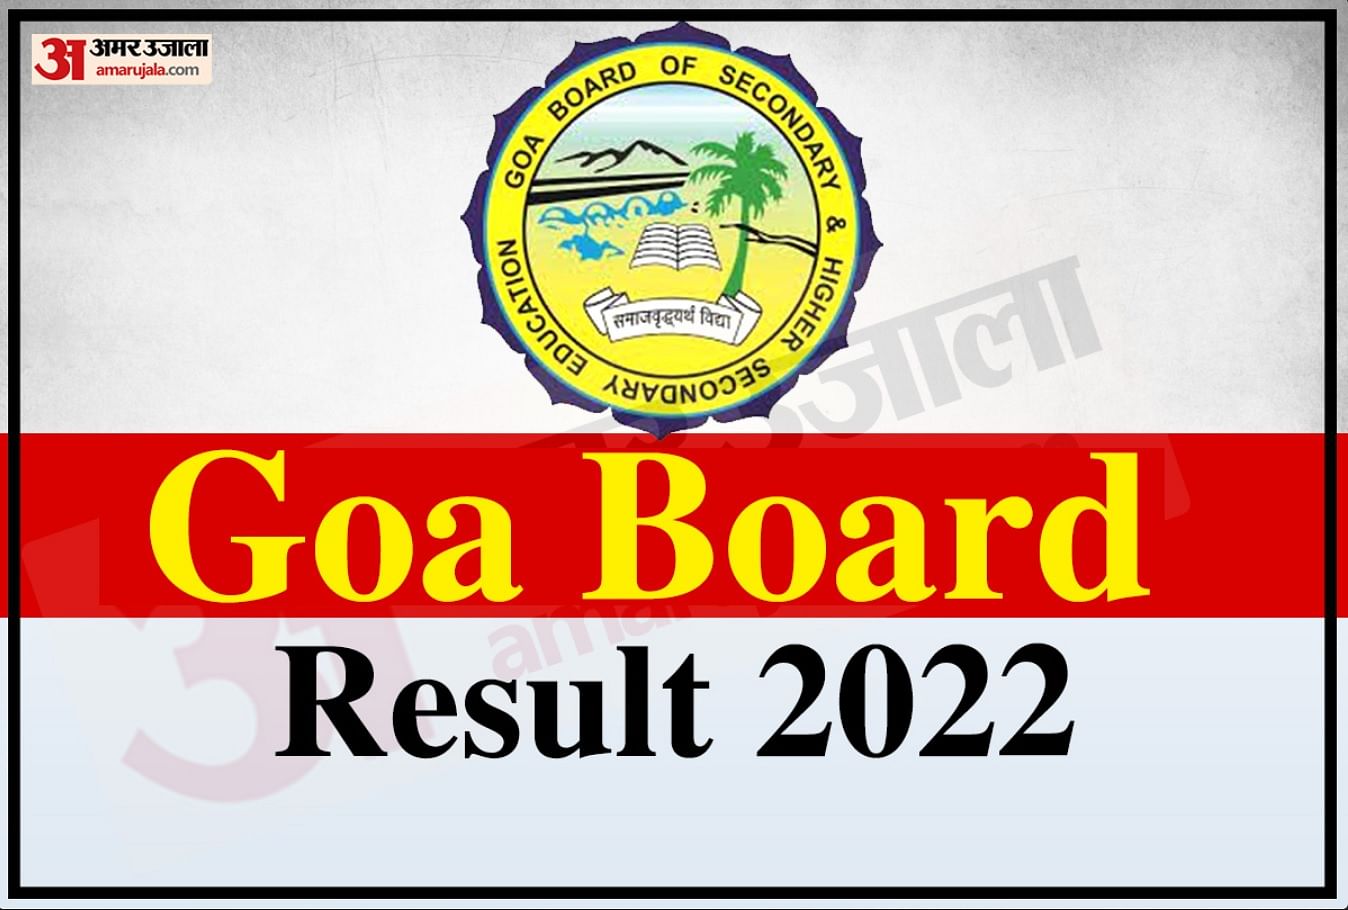 Goa Board HSSC Result 2022 Released, Check Pass Percentage and Other Statistics Here